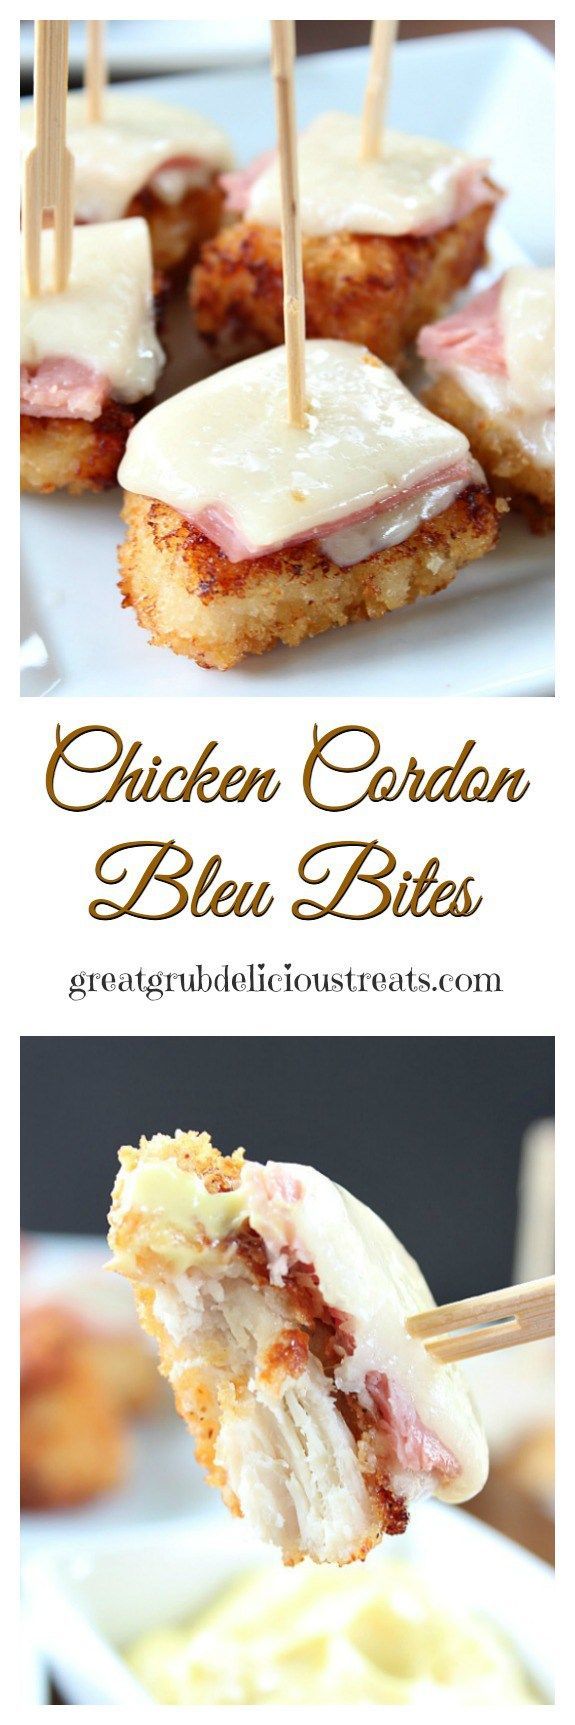 Chicken Cordon Bleu Bites ~ These crispy, crunchy bites of deliciousness make a great tasty appetizer.